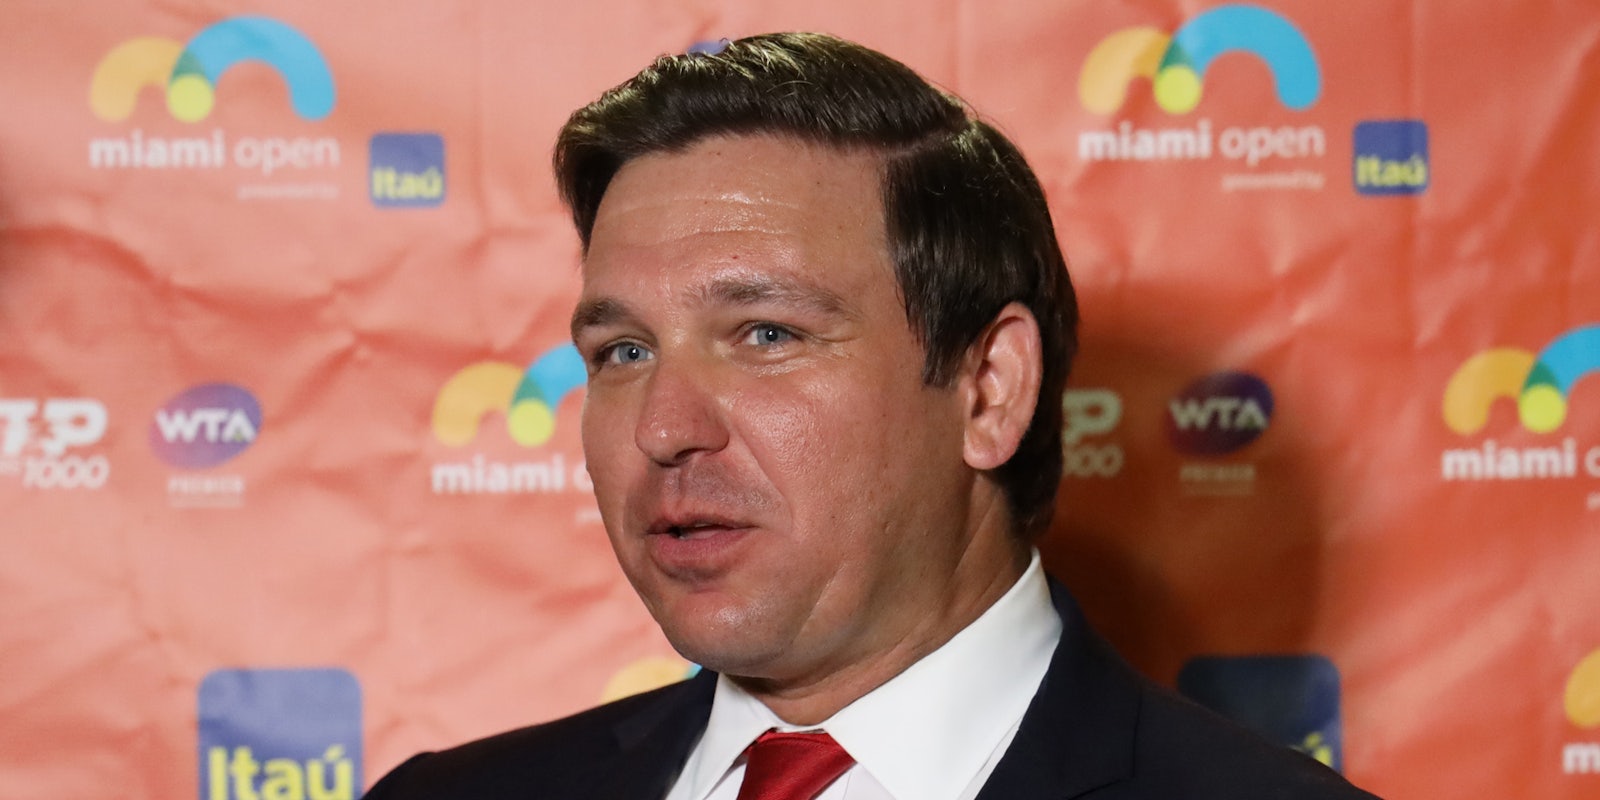 Ron DeSantis speaking in front of coral colored background